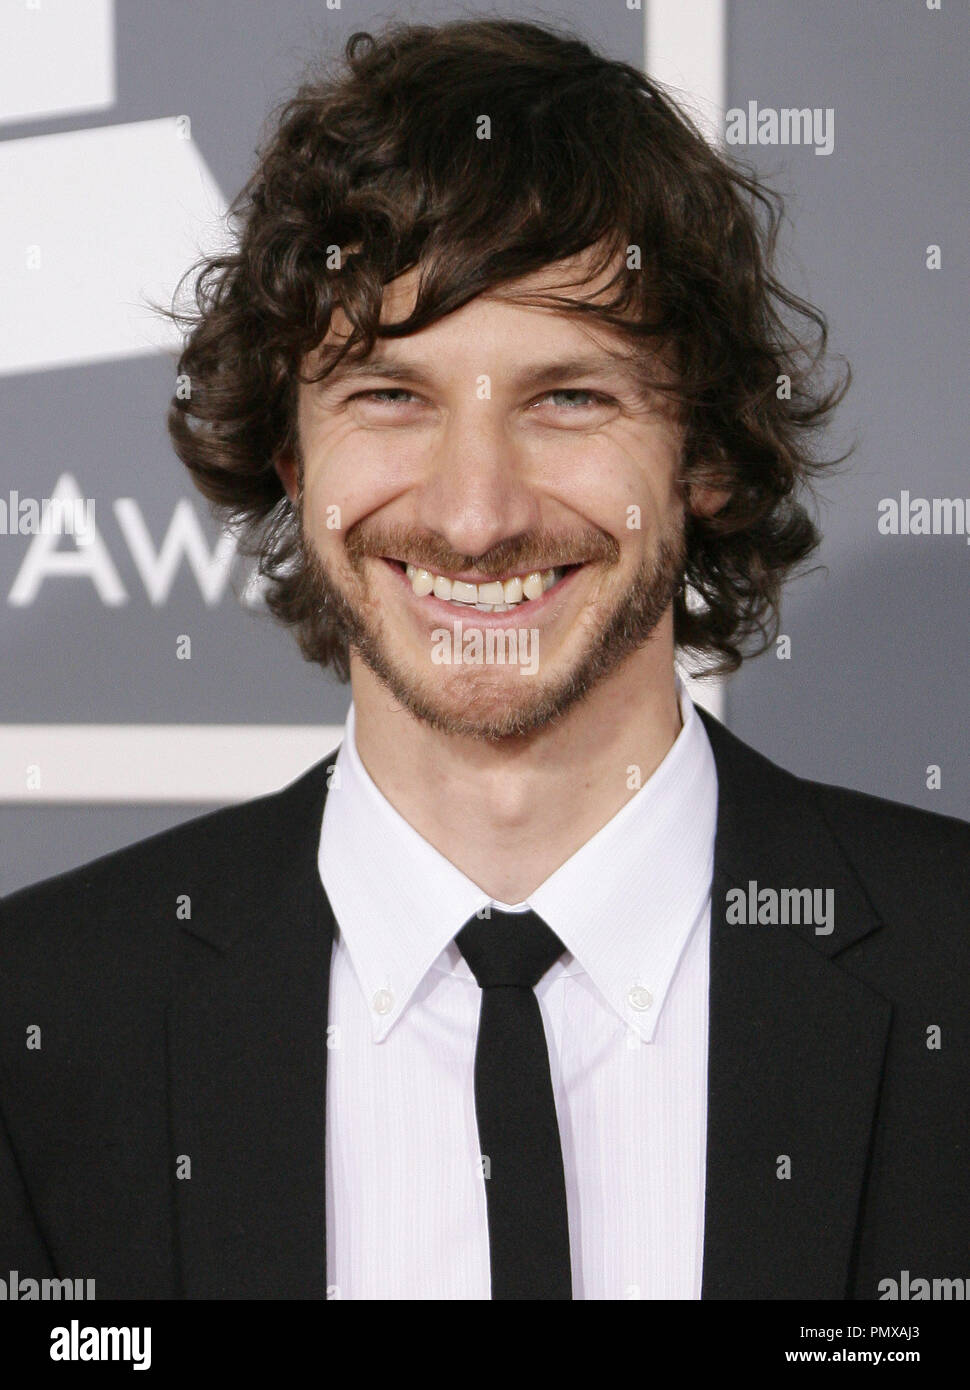 Gotye at the 55th Annual Grammy Awards held at the Staples Center in Los Angeles, CA.The event took place on Sunday, February 10, 2013. Photo by PRPP / PictureLux  File Reference # 31836 082PRPP  For Editorial Use Only -  All Rights Reserved Stock Photo